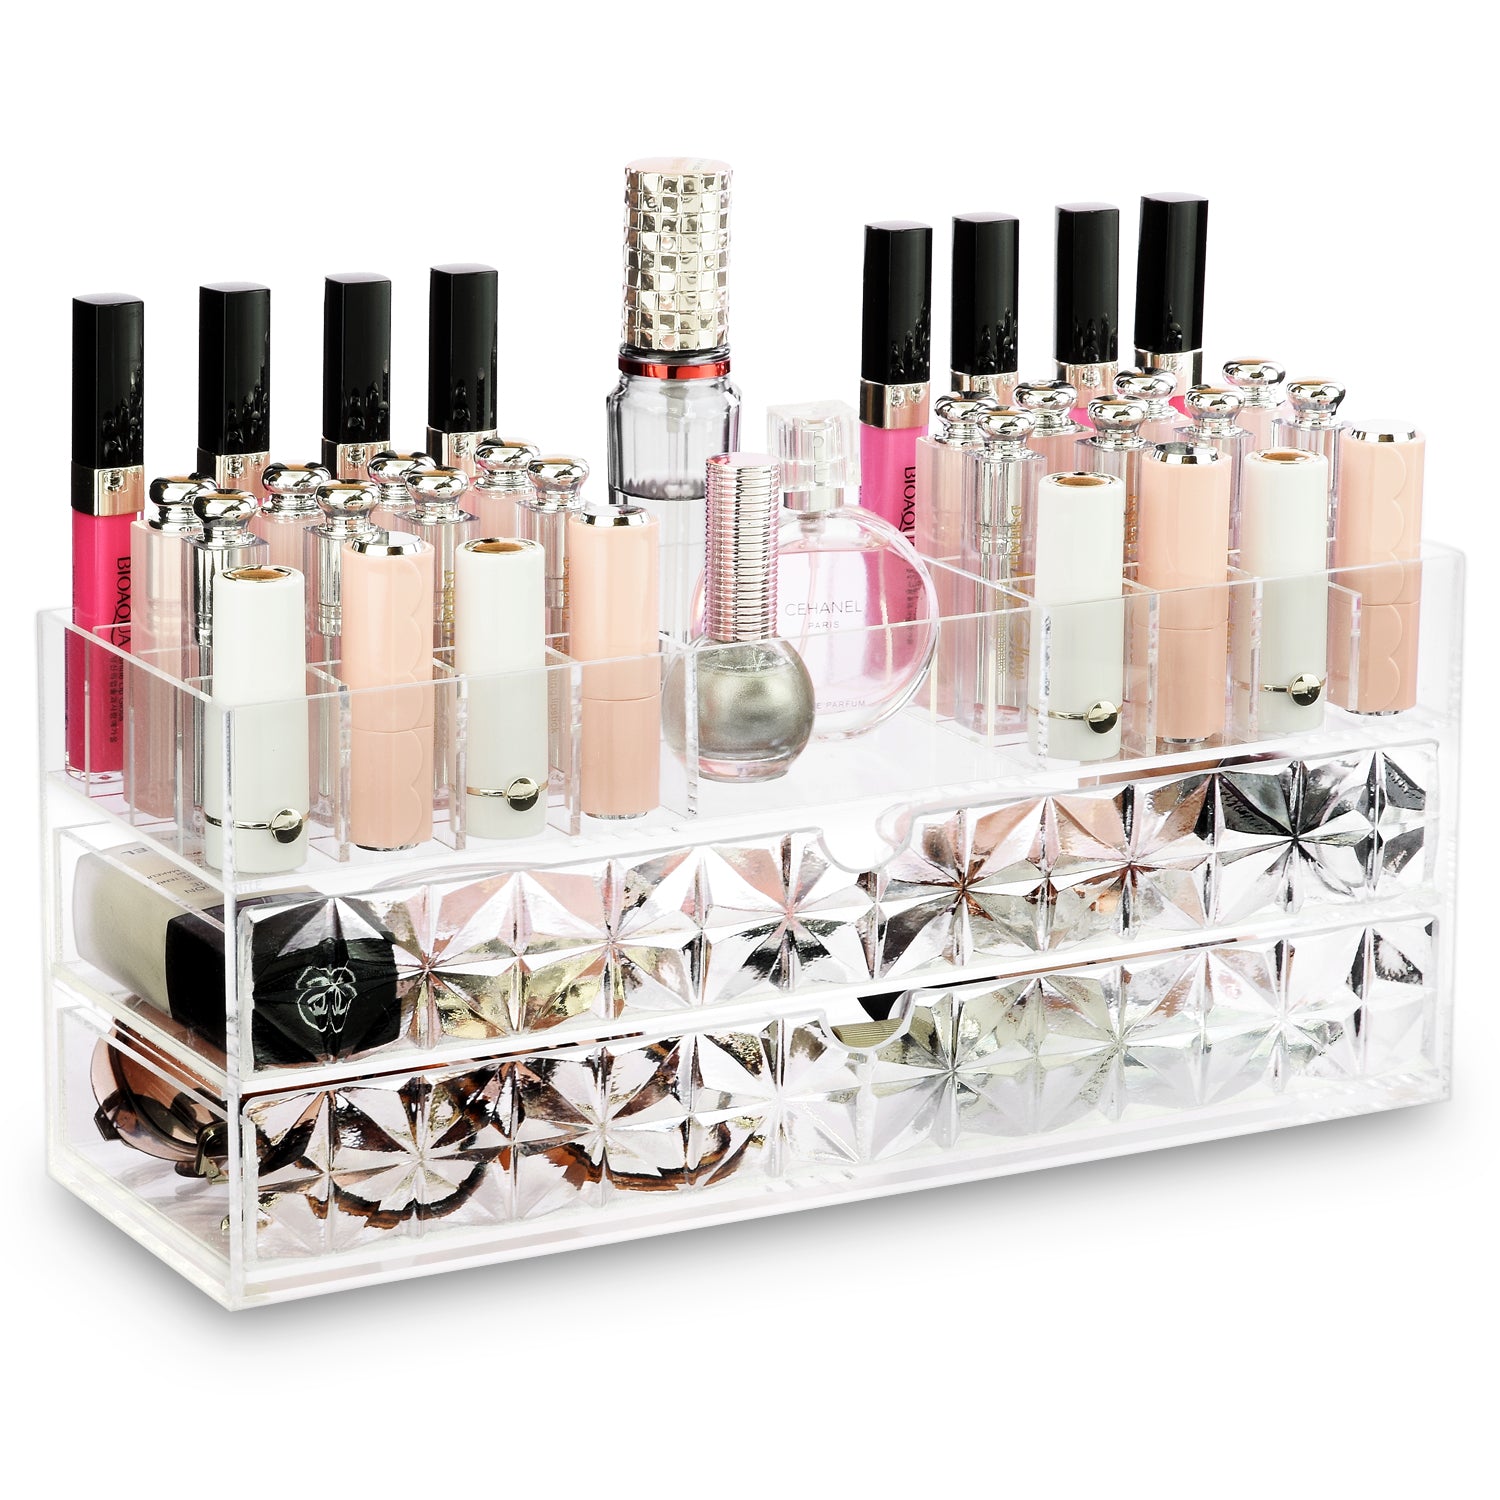 Makeup Storage With The eDiva Acrylic Organizer! (Collab post with